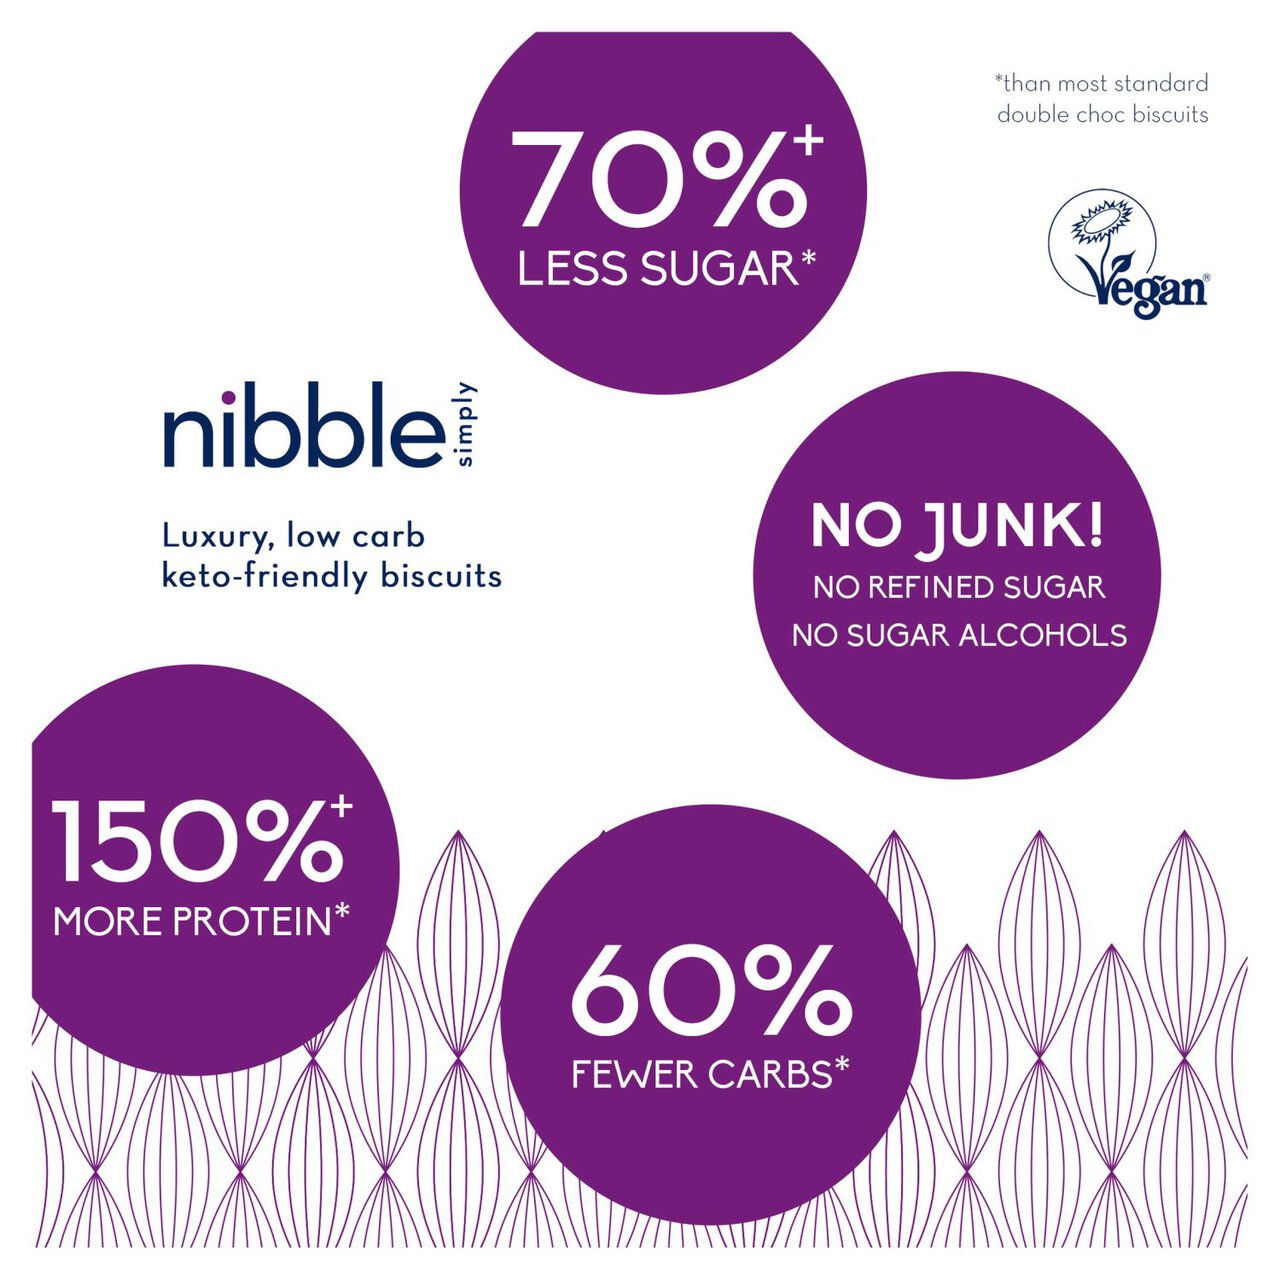 Nibble Simply Doubly Delicious Choc Choc Chip Low Carb Biscuit Bites 36g